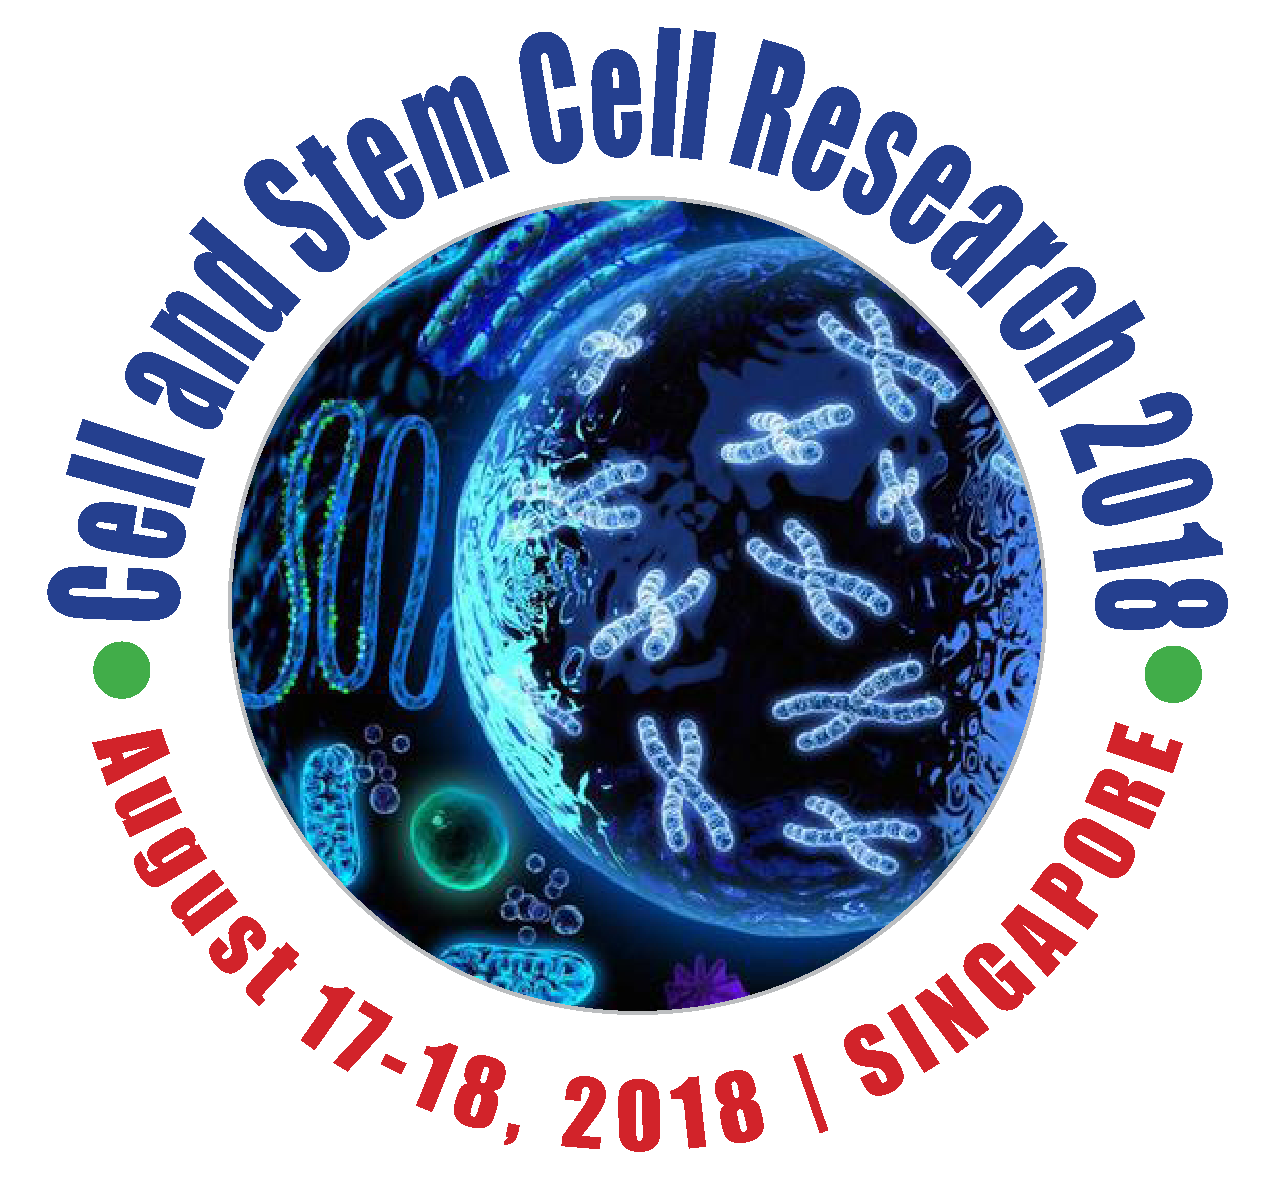 International Conference on Cell and Stem Cell Research